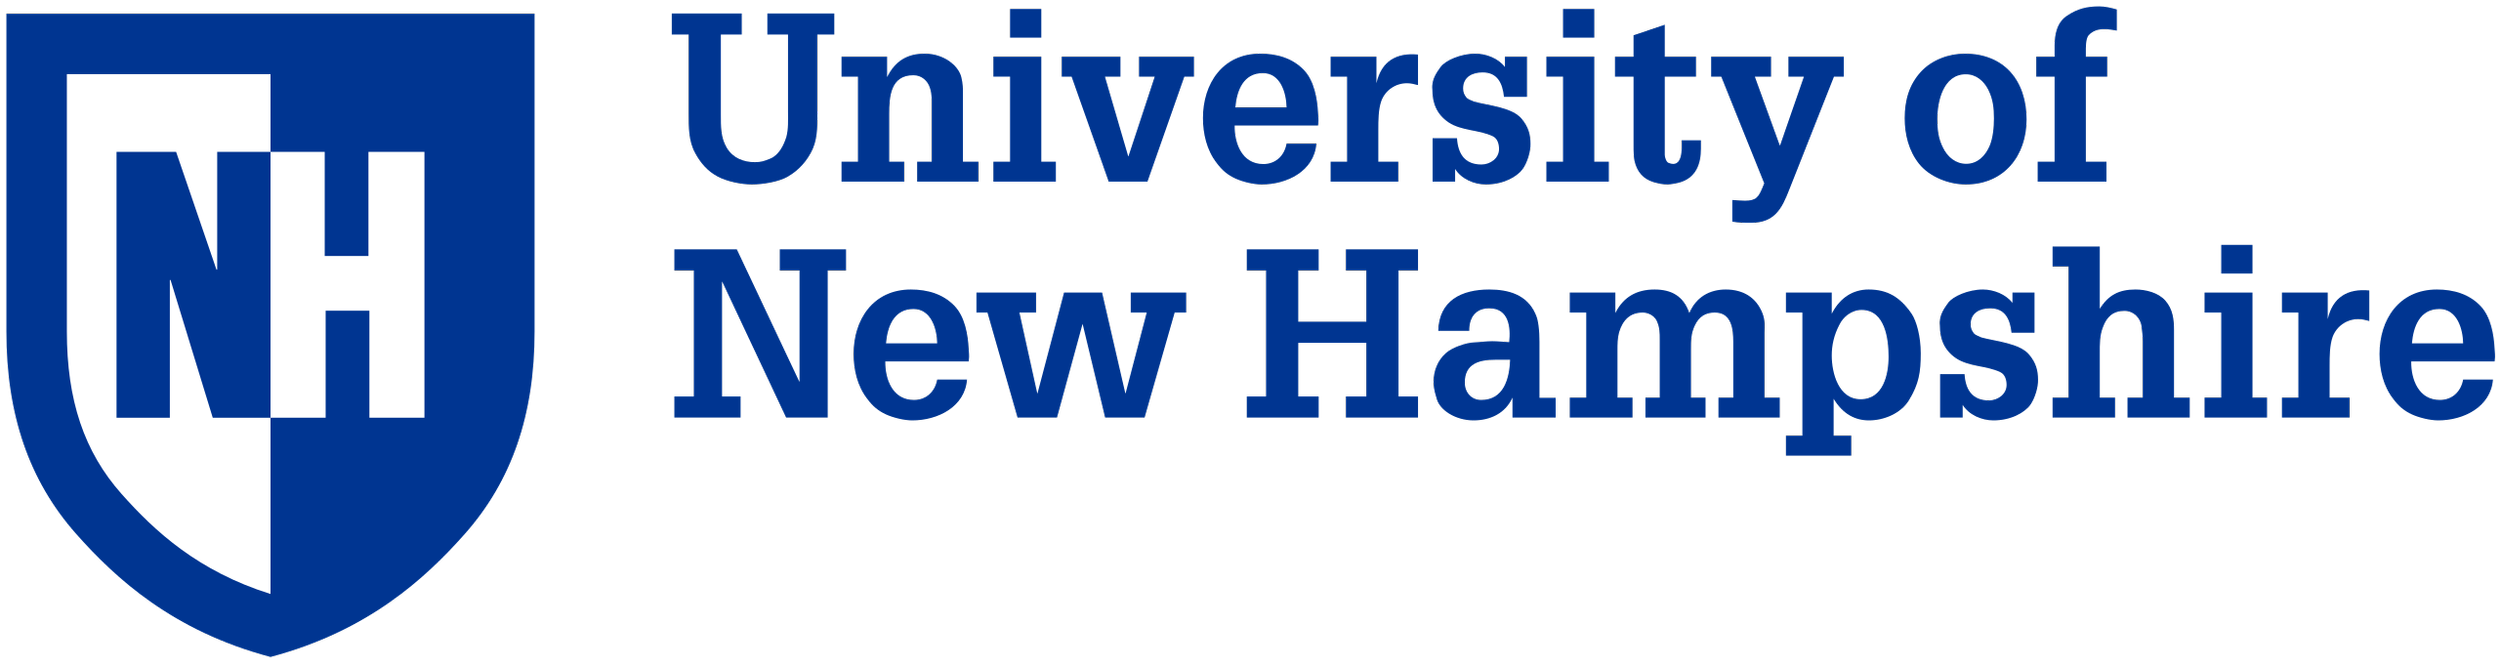 2560px-University_of_New_Hampshire_logo.svg.png